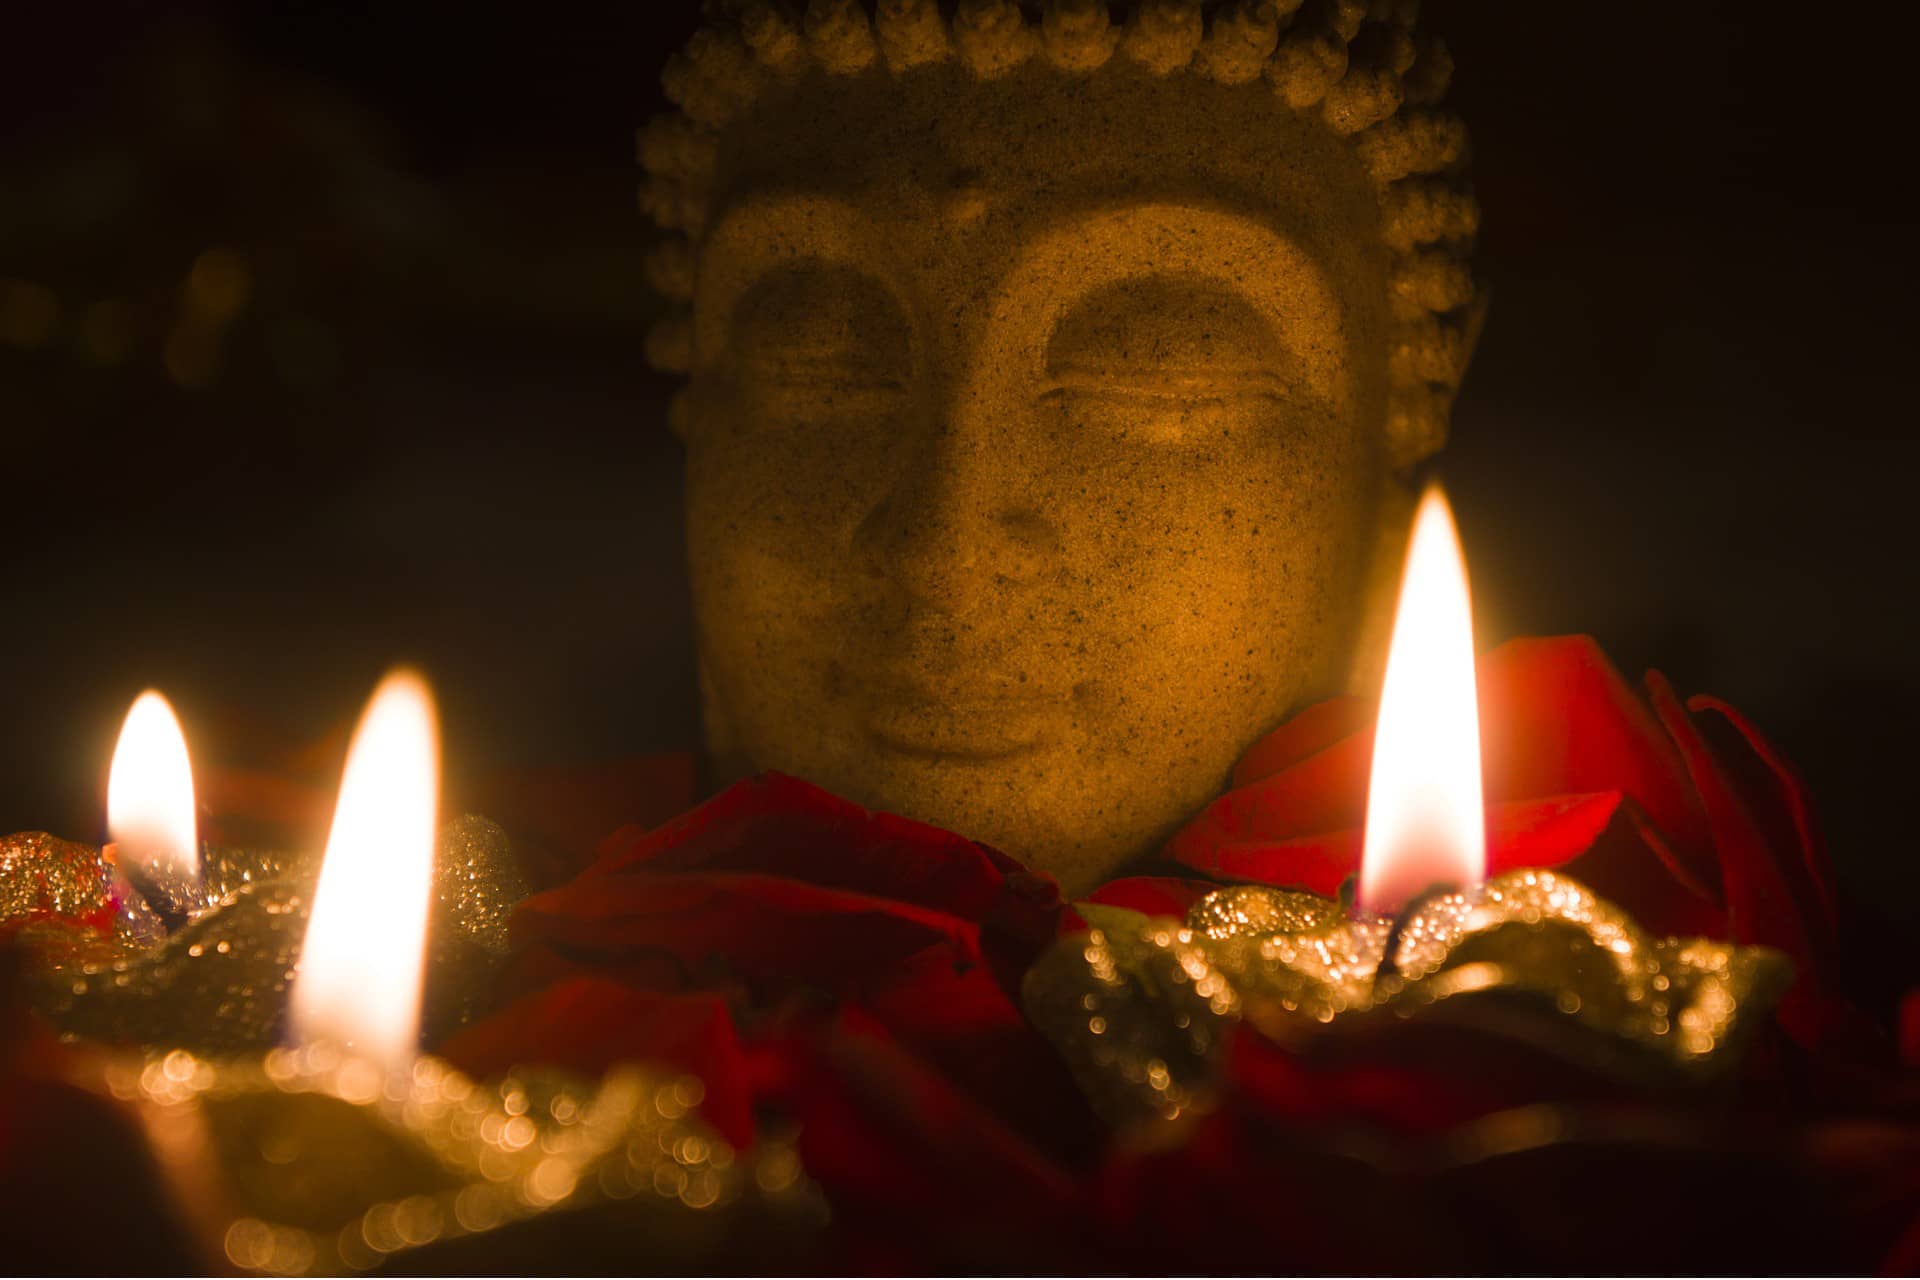 Head of a Buddha stature with candles lit in front of it